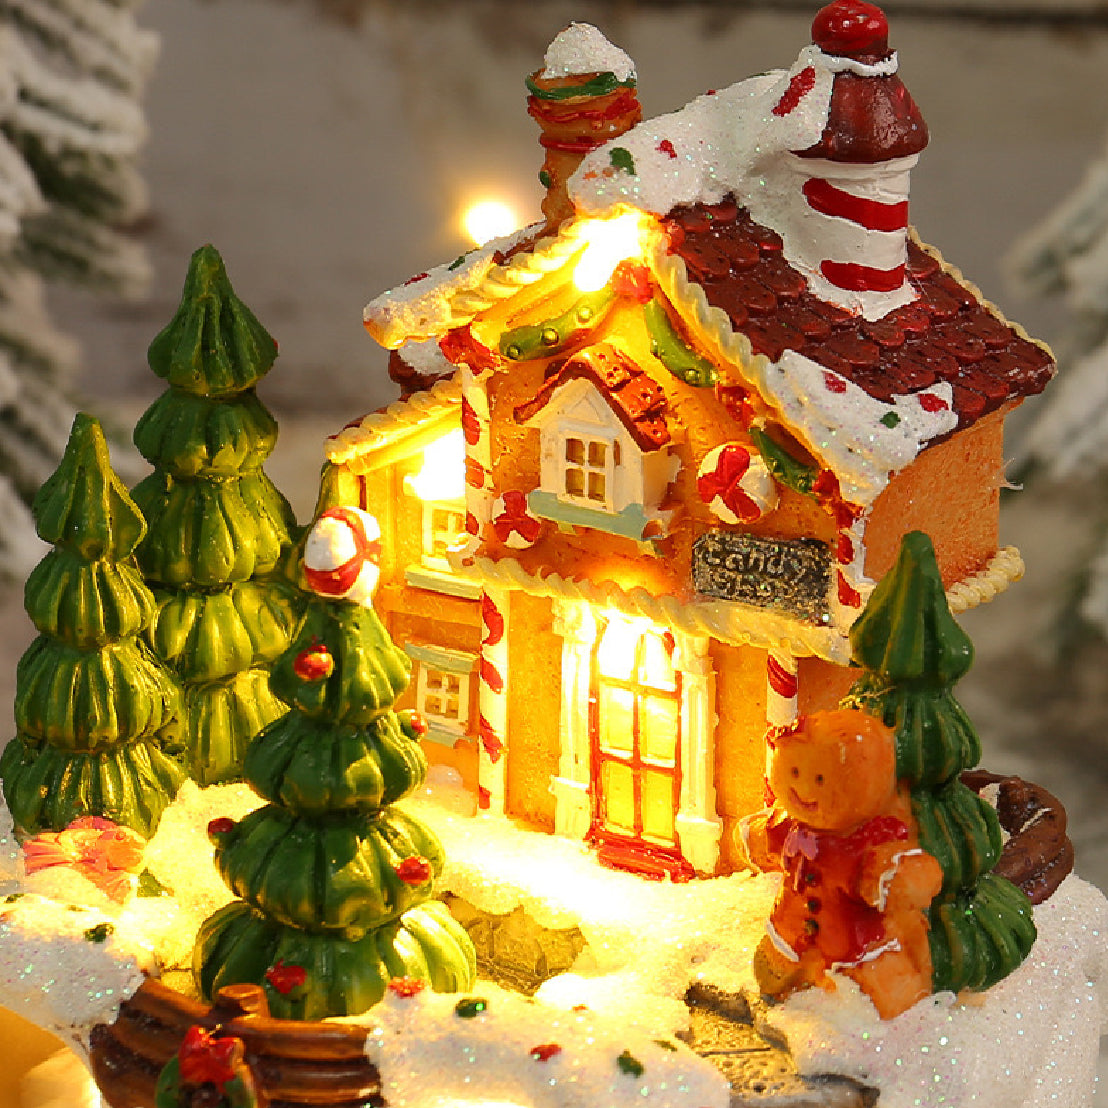 Illuminated Musical House Ornament, 4.72 x 4.72 x 6.29 Inches, Christmas Atmosphere Music Box Night Light Cottage, Children's Christmas Gift